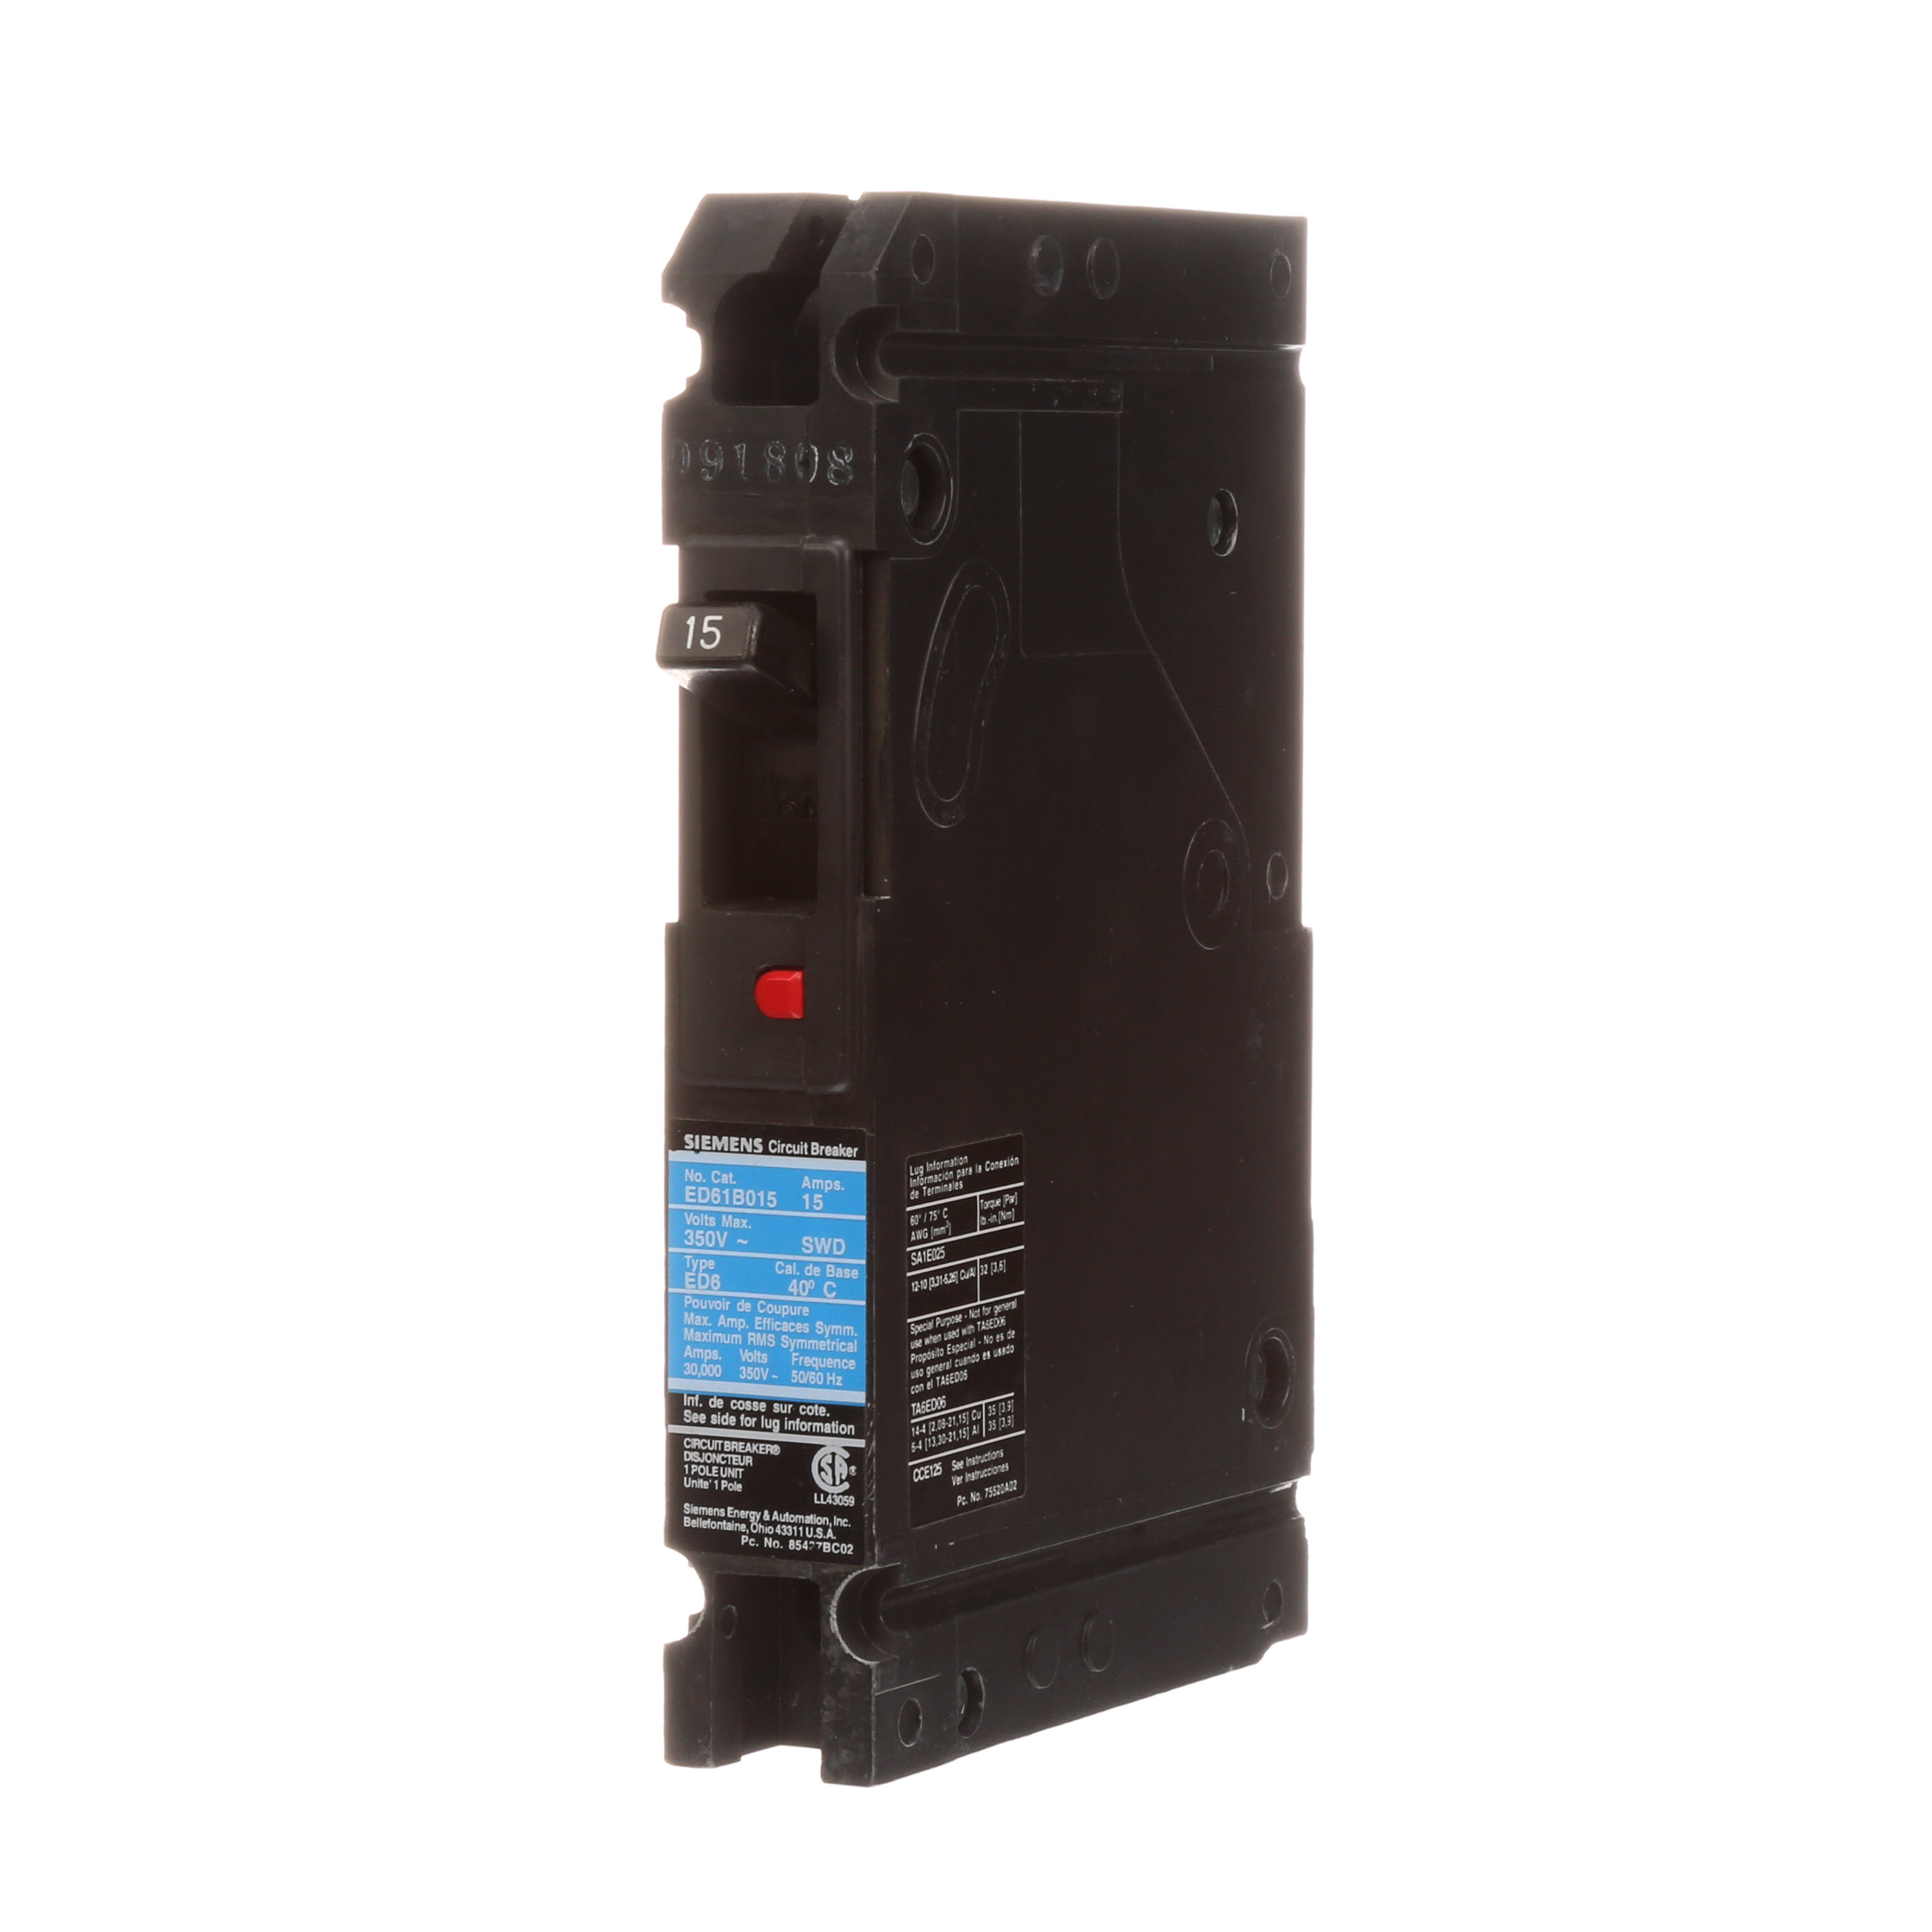 SIEMENS LOW VOLTAGE SENTRON MOLDED CASE CIRCUIT BREAKER WITH THERMAL - MAGNETICTRIP UNIT. STANDARD 40 DEG C BREAKER ED FRAME WITH STANDARD BREAKING CAPACITY. 15A 1-POLE (30KAIC AT 347V). NON-INTERCHANGEABLE TRIP UNIT. SPECIAL FEATURES VALUE PACK, LOAD LUGS ONLY (SA1E025) WIRE RANGE 14 - 10AWG (CU) / 12 - 10AWG (AL). DIMENSIONS (W x H x D) IN 1.00 x 6.4 x 3.92.